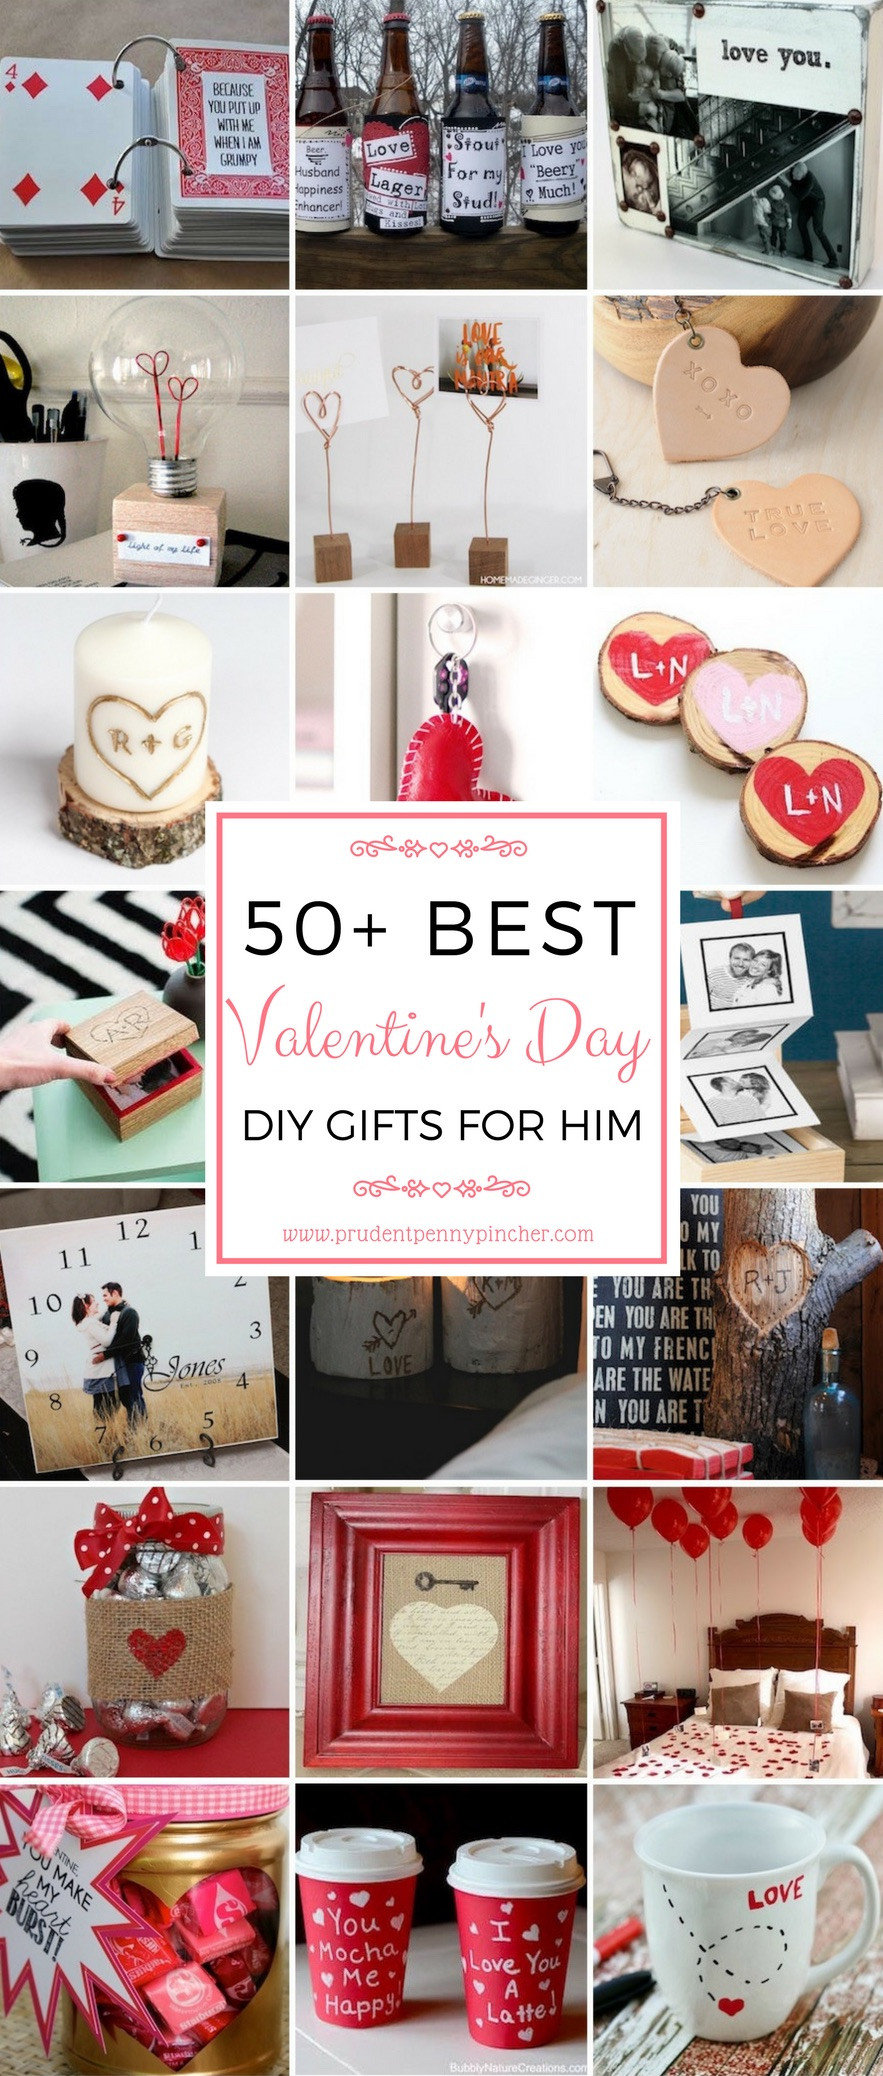 DIY Valentines Gift For Him
 50 DIY Valentines Day Gifts for Him Prudent Penny Pincher